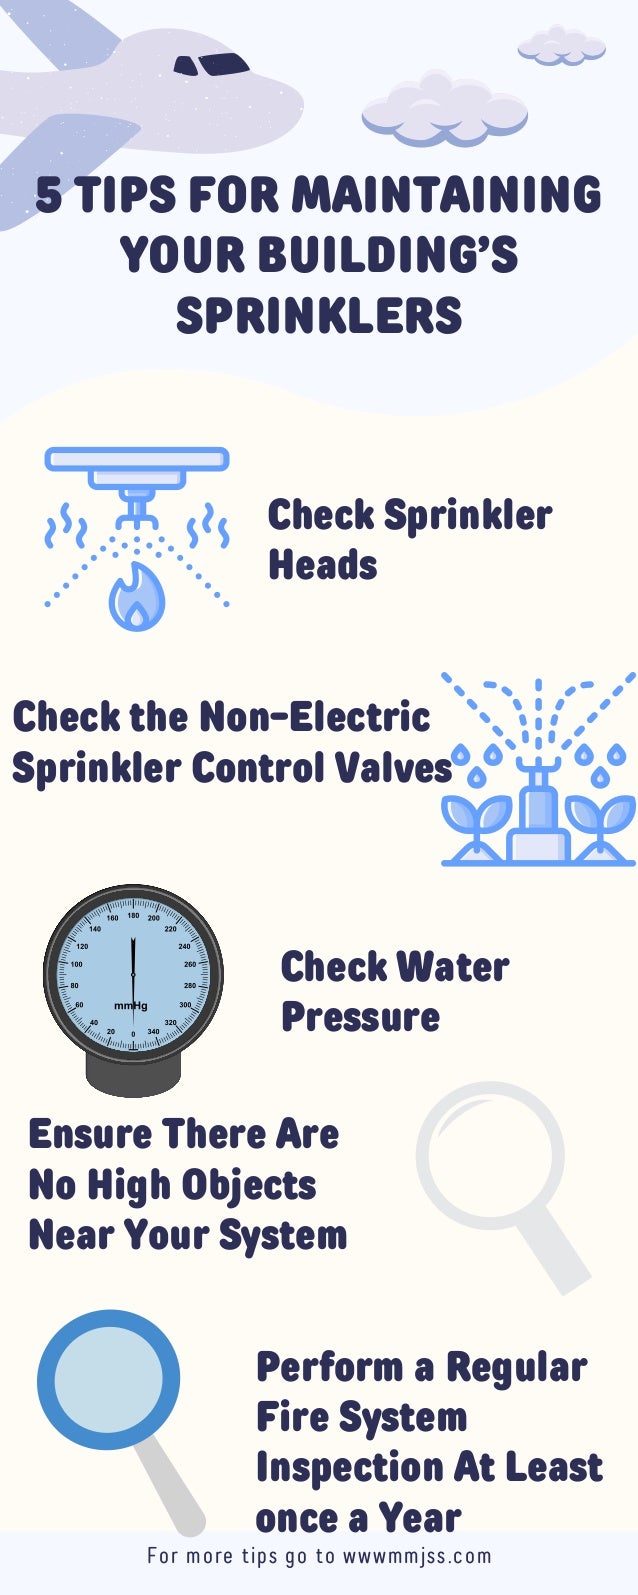 5 TIPS FOR MAINTAINING
YOUR BUILDING’S
SPRINKLERS


Check Sprinkler
Heads
Check the Non-Electric
Sprinkler Control Valves
Check Water
Pressure
Ensure There Are
No High Objects
Near Your System
Perform a Regular
Fire System
Inspection At Least
once a Year
For more tips go to wwwmmjss.com
 